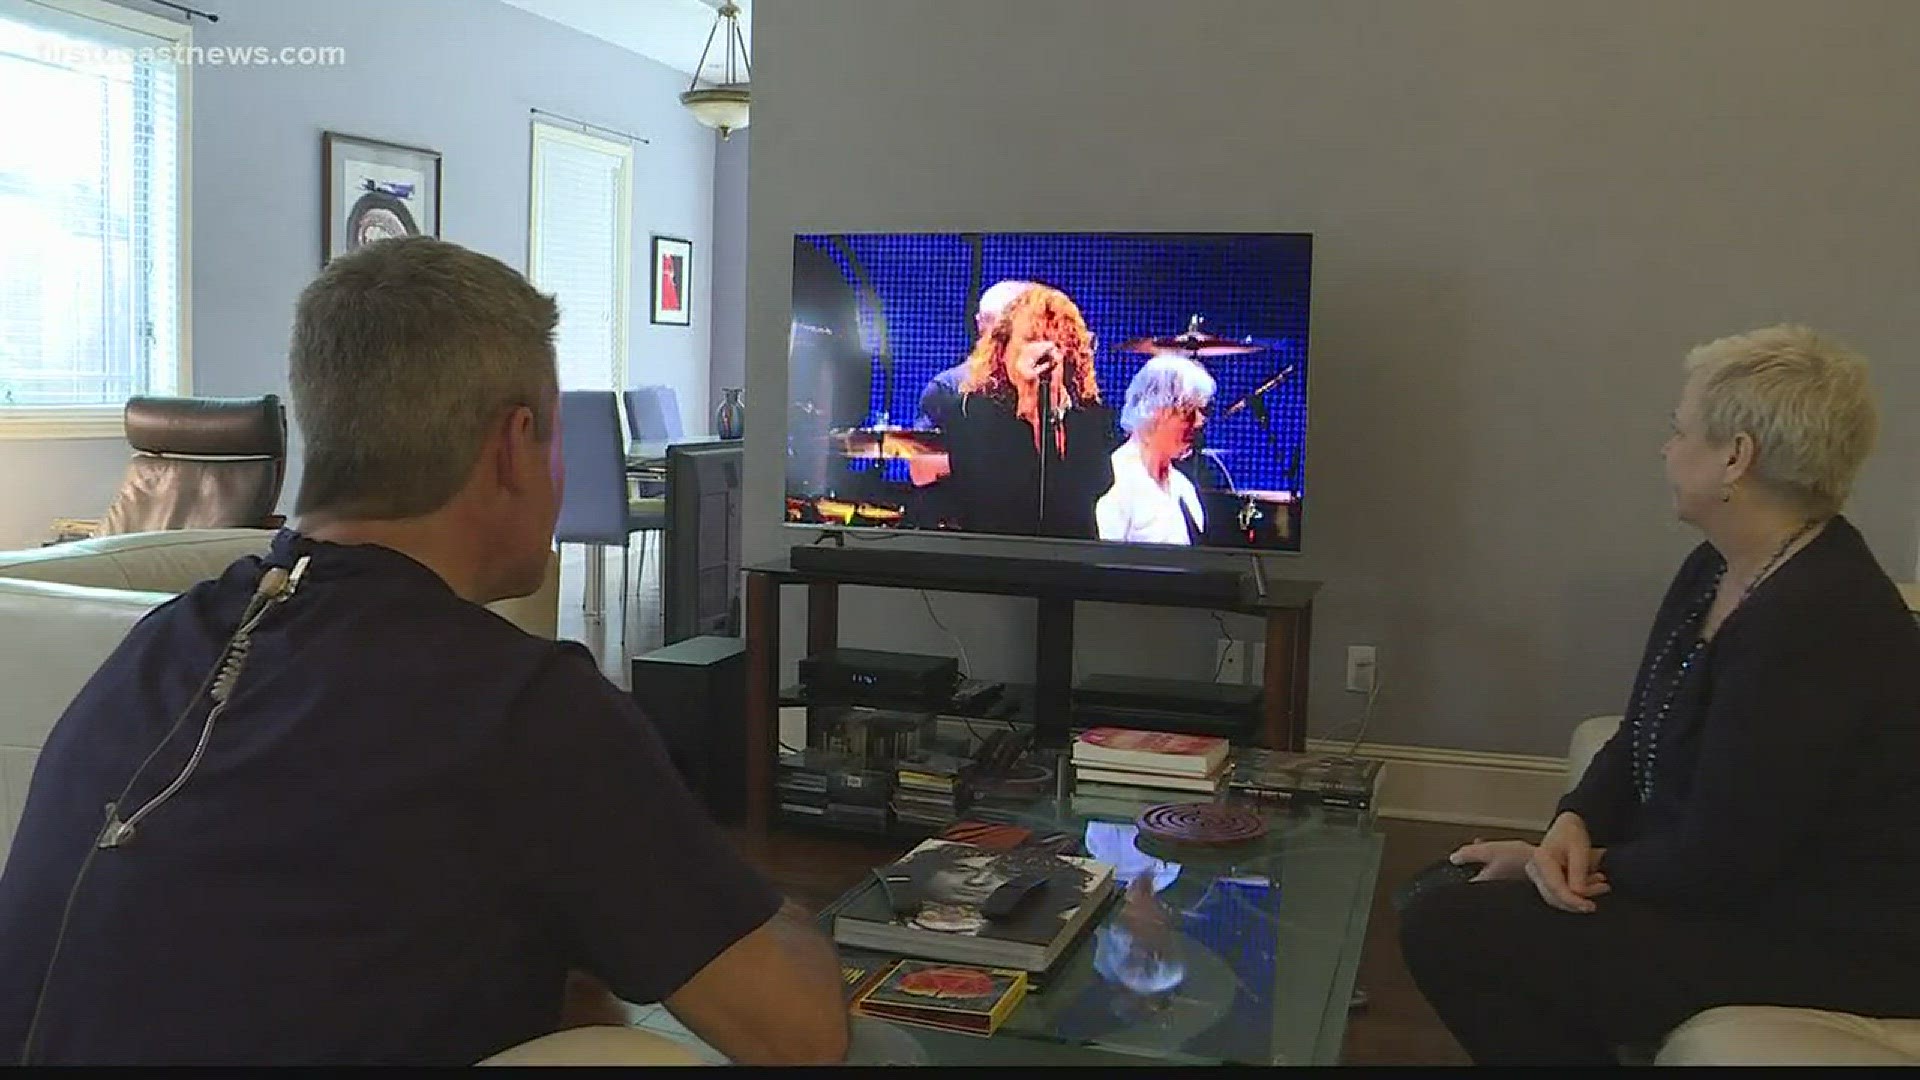 Cancer patient rediscovers 'Whole Lotta Love' for Led Zeppelin's music during treatment